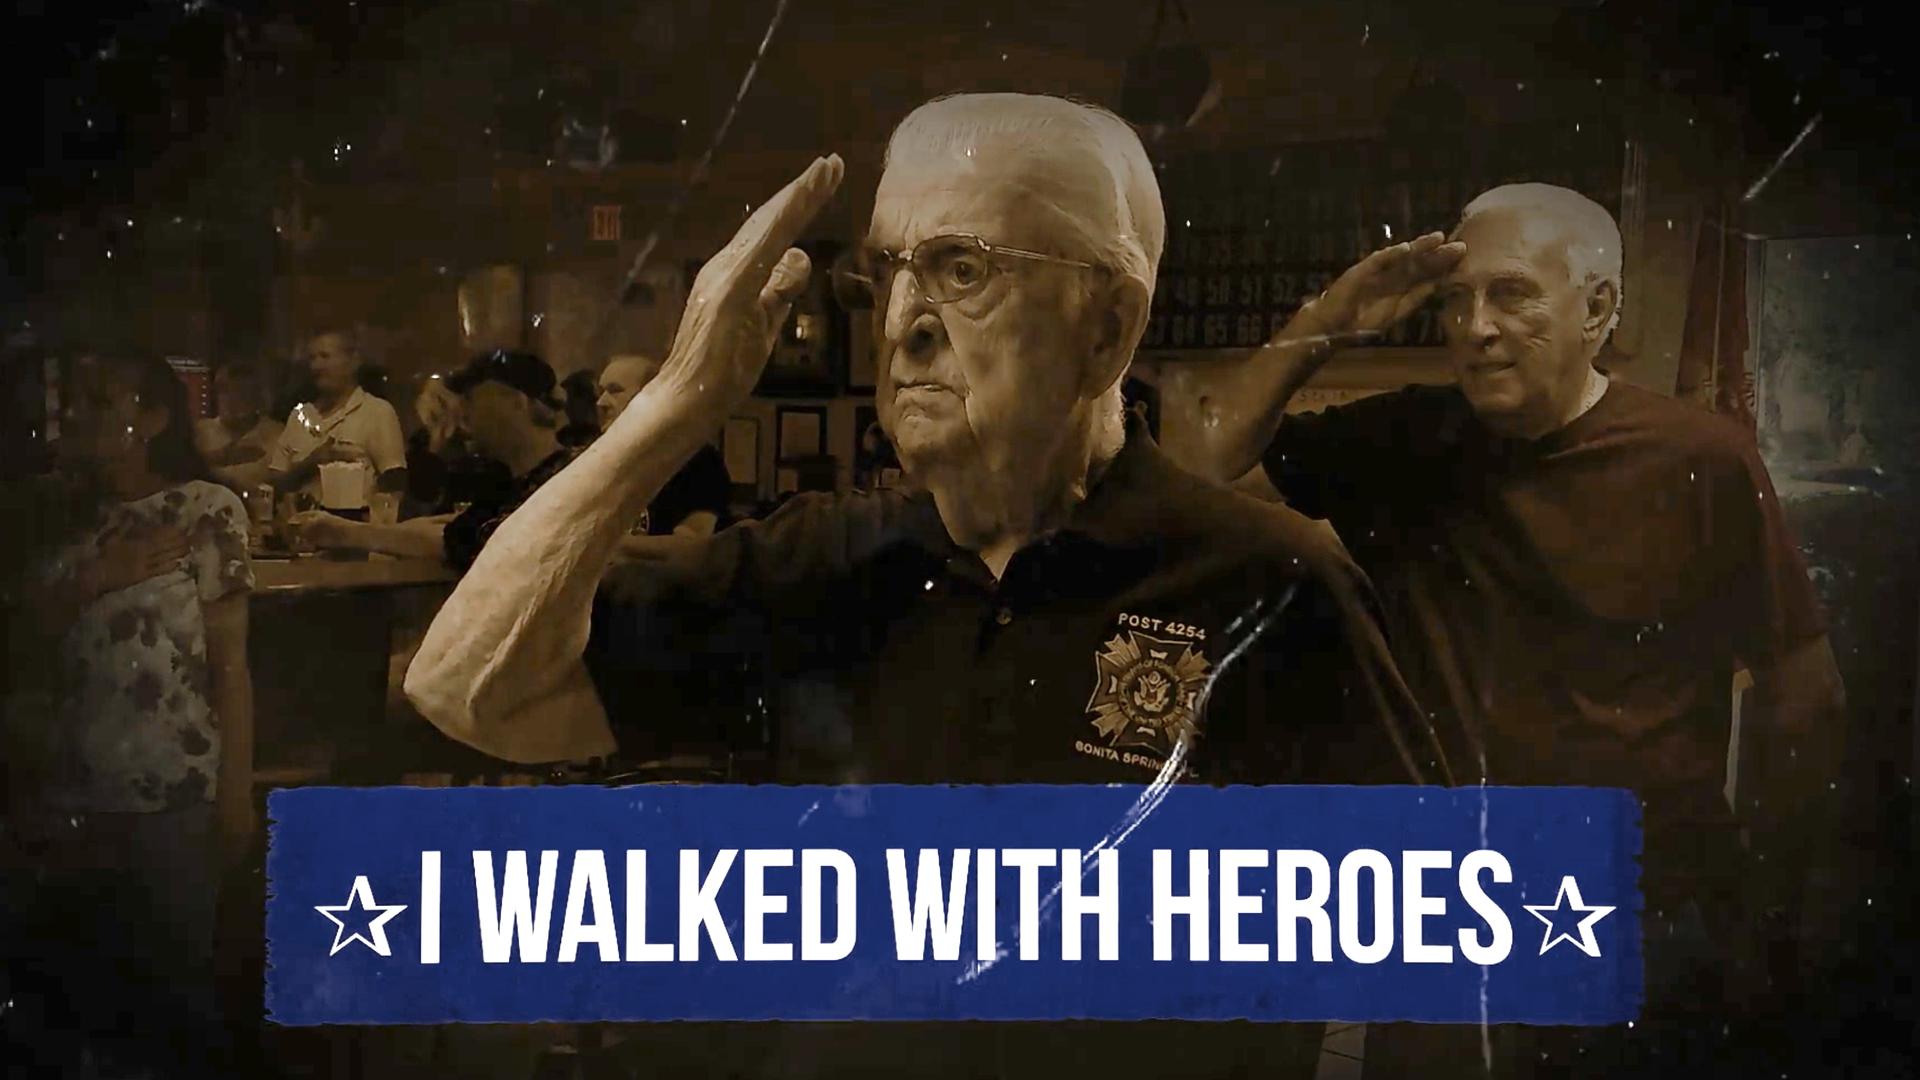 I Walked With Heroes